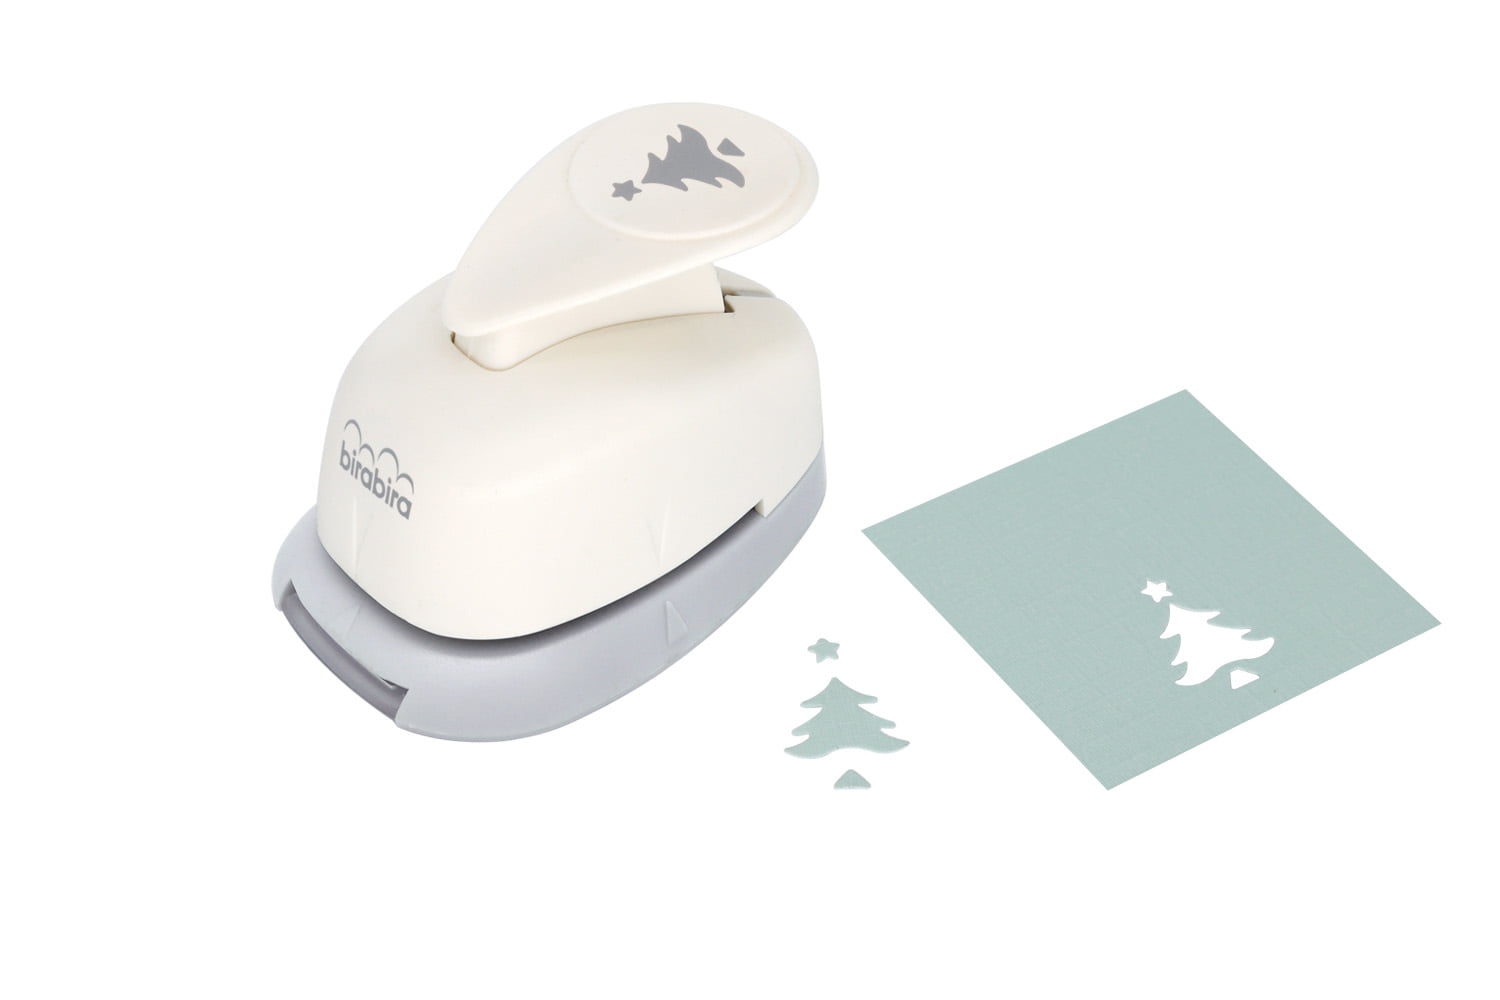 Top Gift Pick for Crafty Kids: Mini Sticker Maker - Fern and Maple